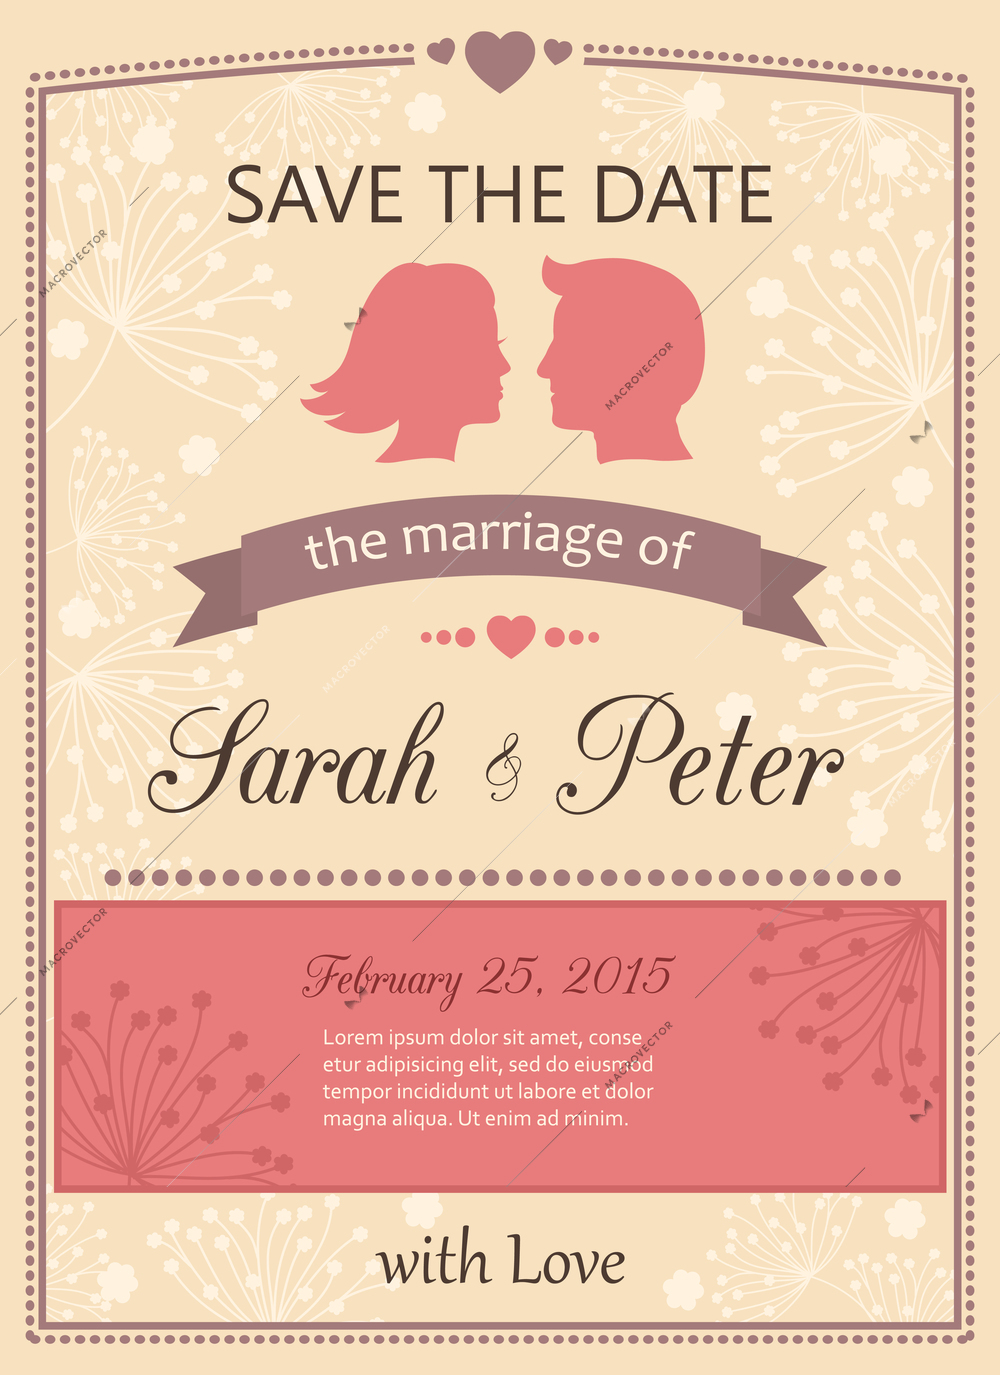 Save the date wedding invitation card template vector illustration